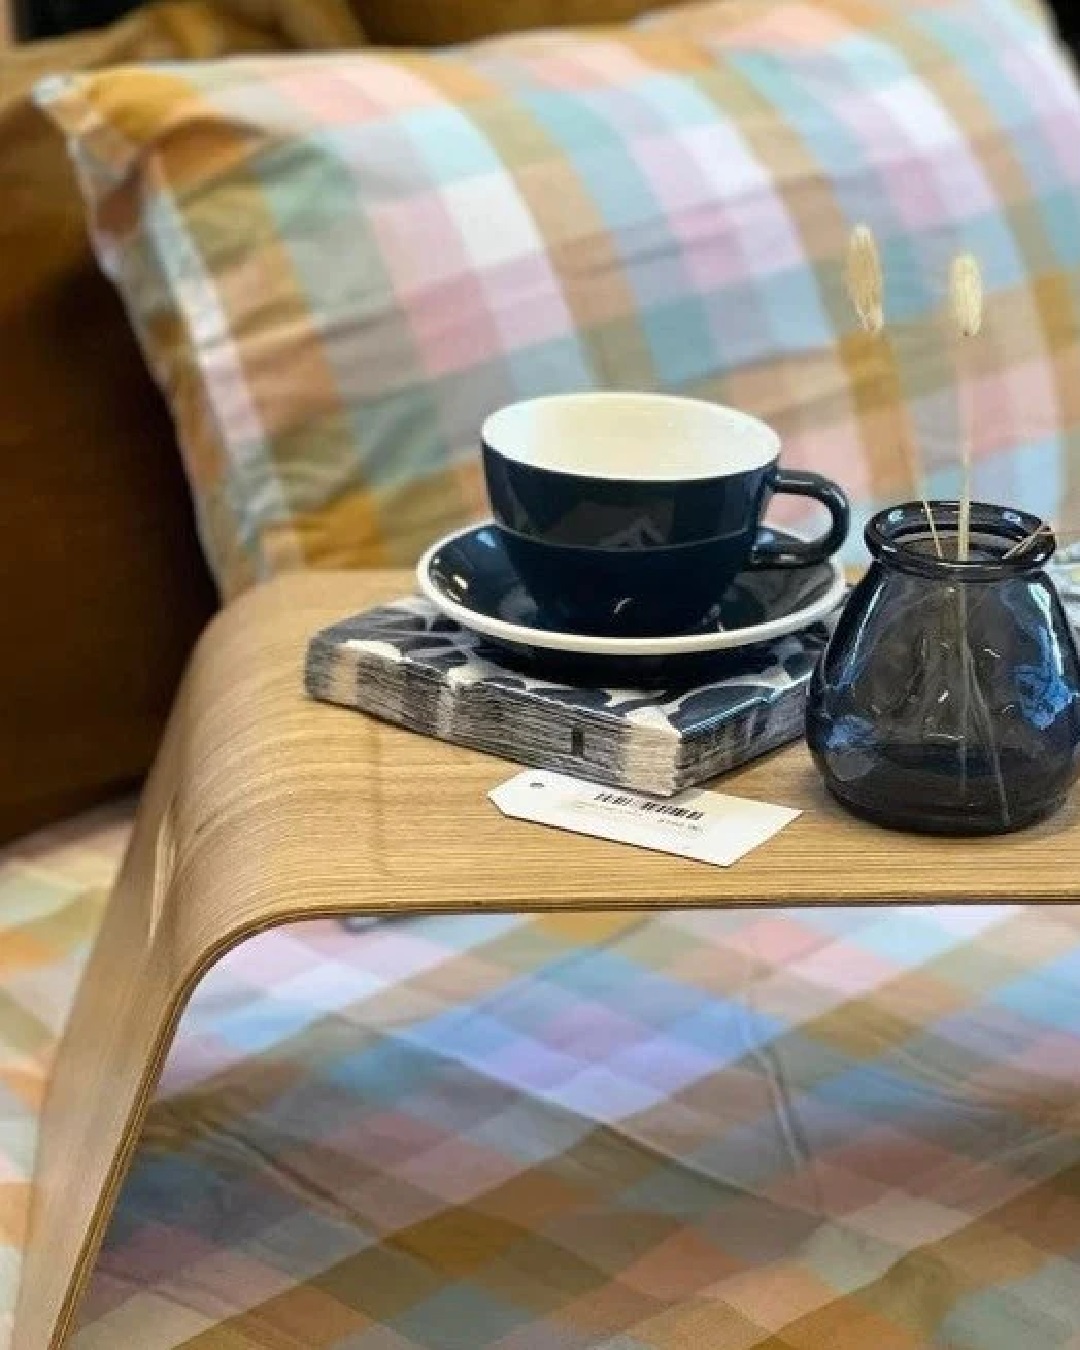 Checkered orange and blue pillow and bedding with coffee and vase on wooden tray